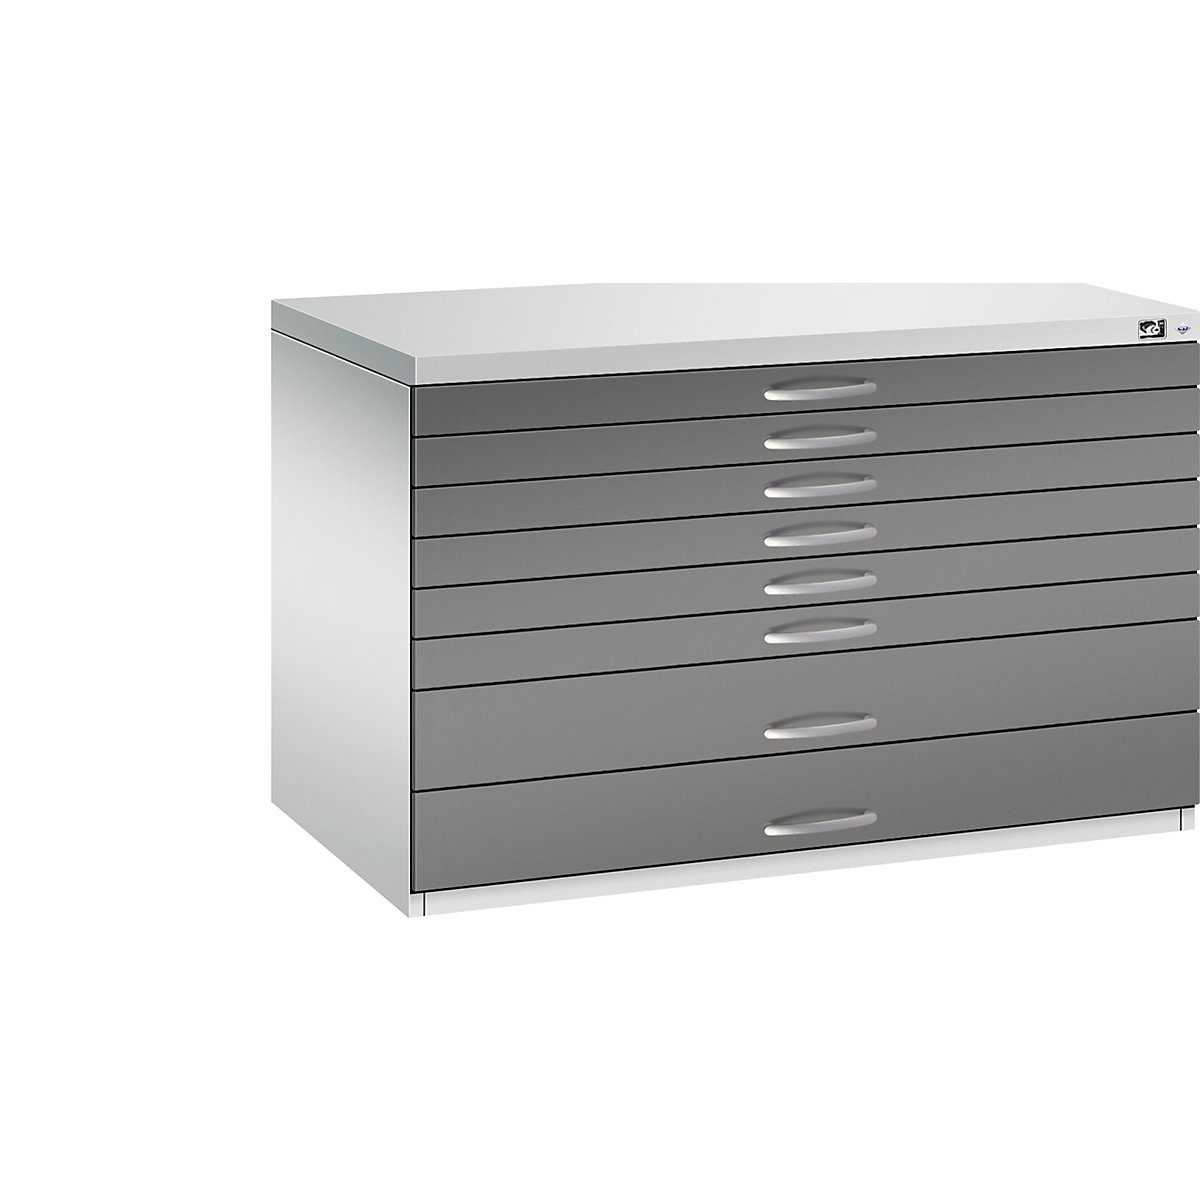 Drawing cabinet – C+P, A1, 8 drawers, height 760 mm, light grey / volcanic grey-16